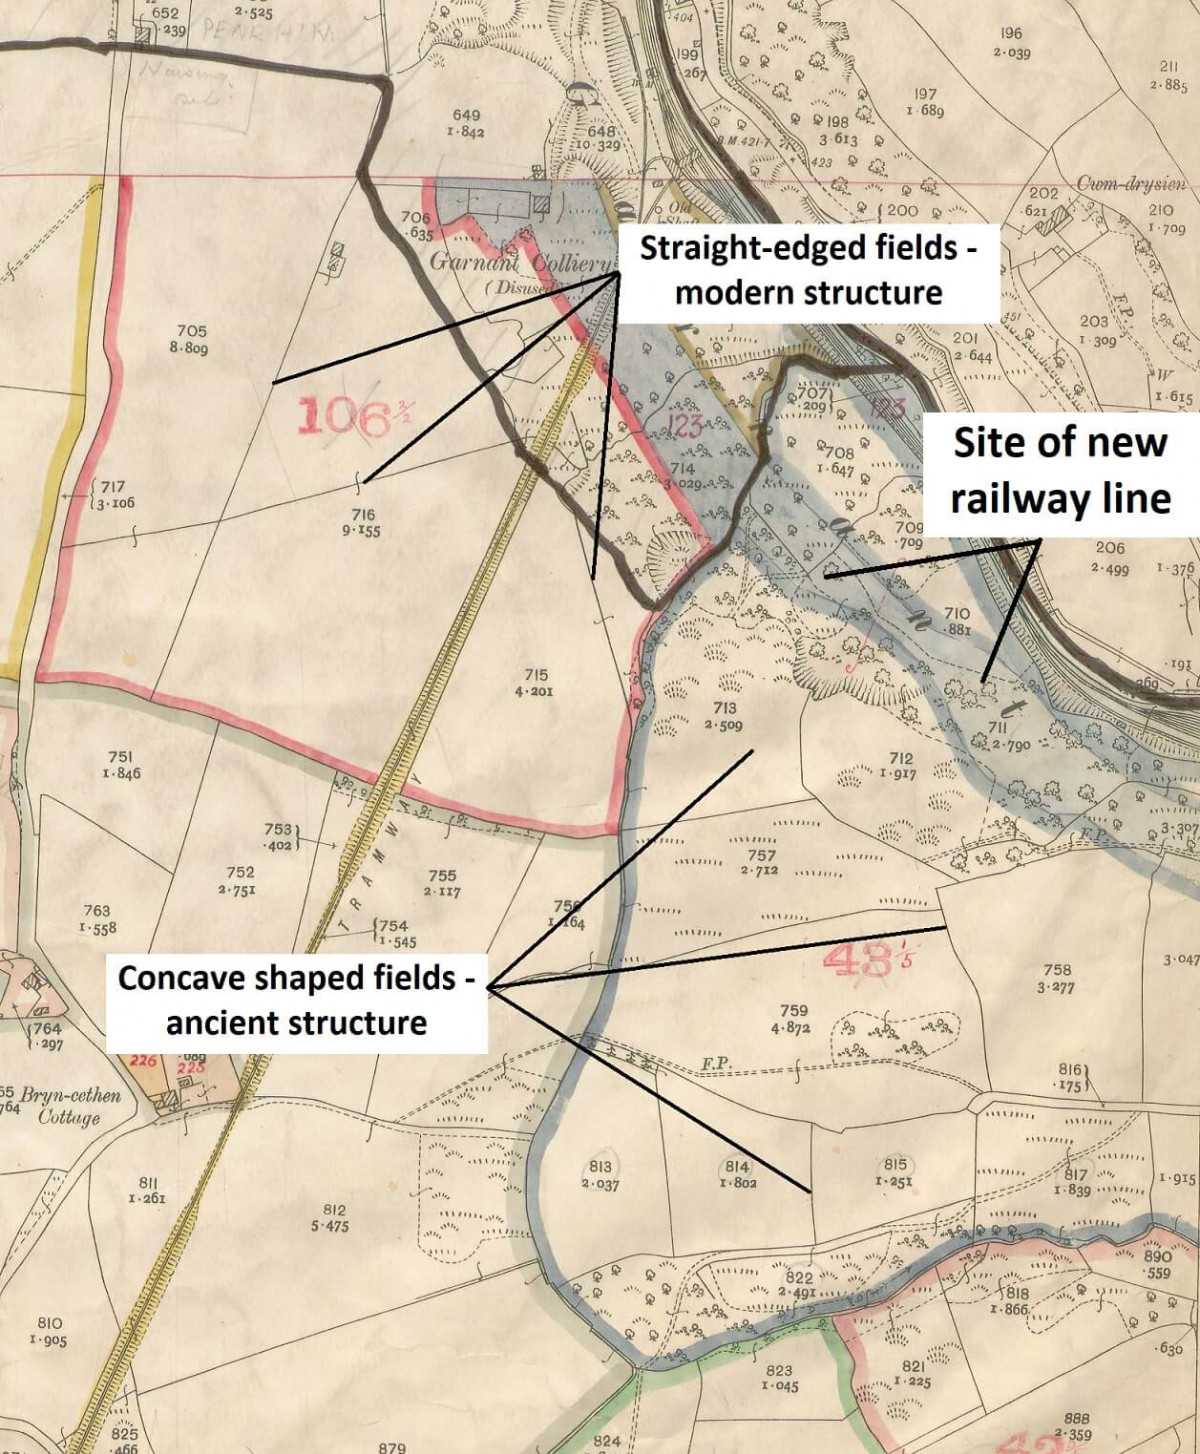 Old Map Showing Field Shapes And Line For New Railway